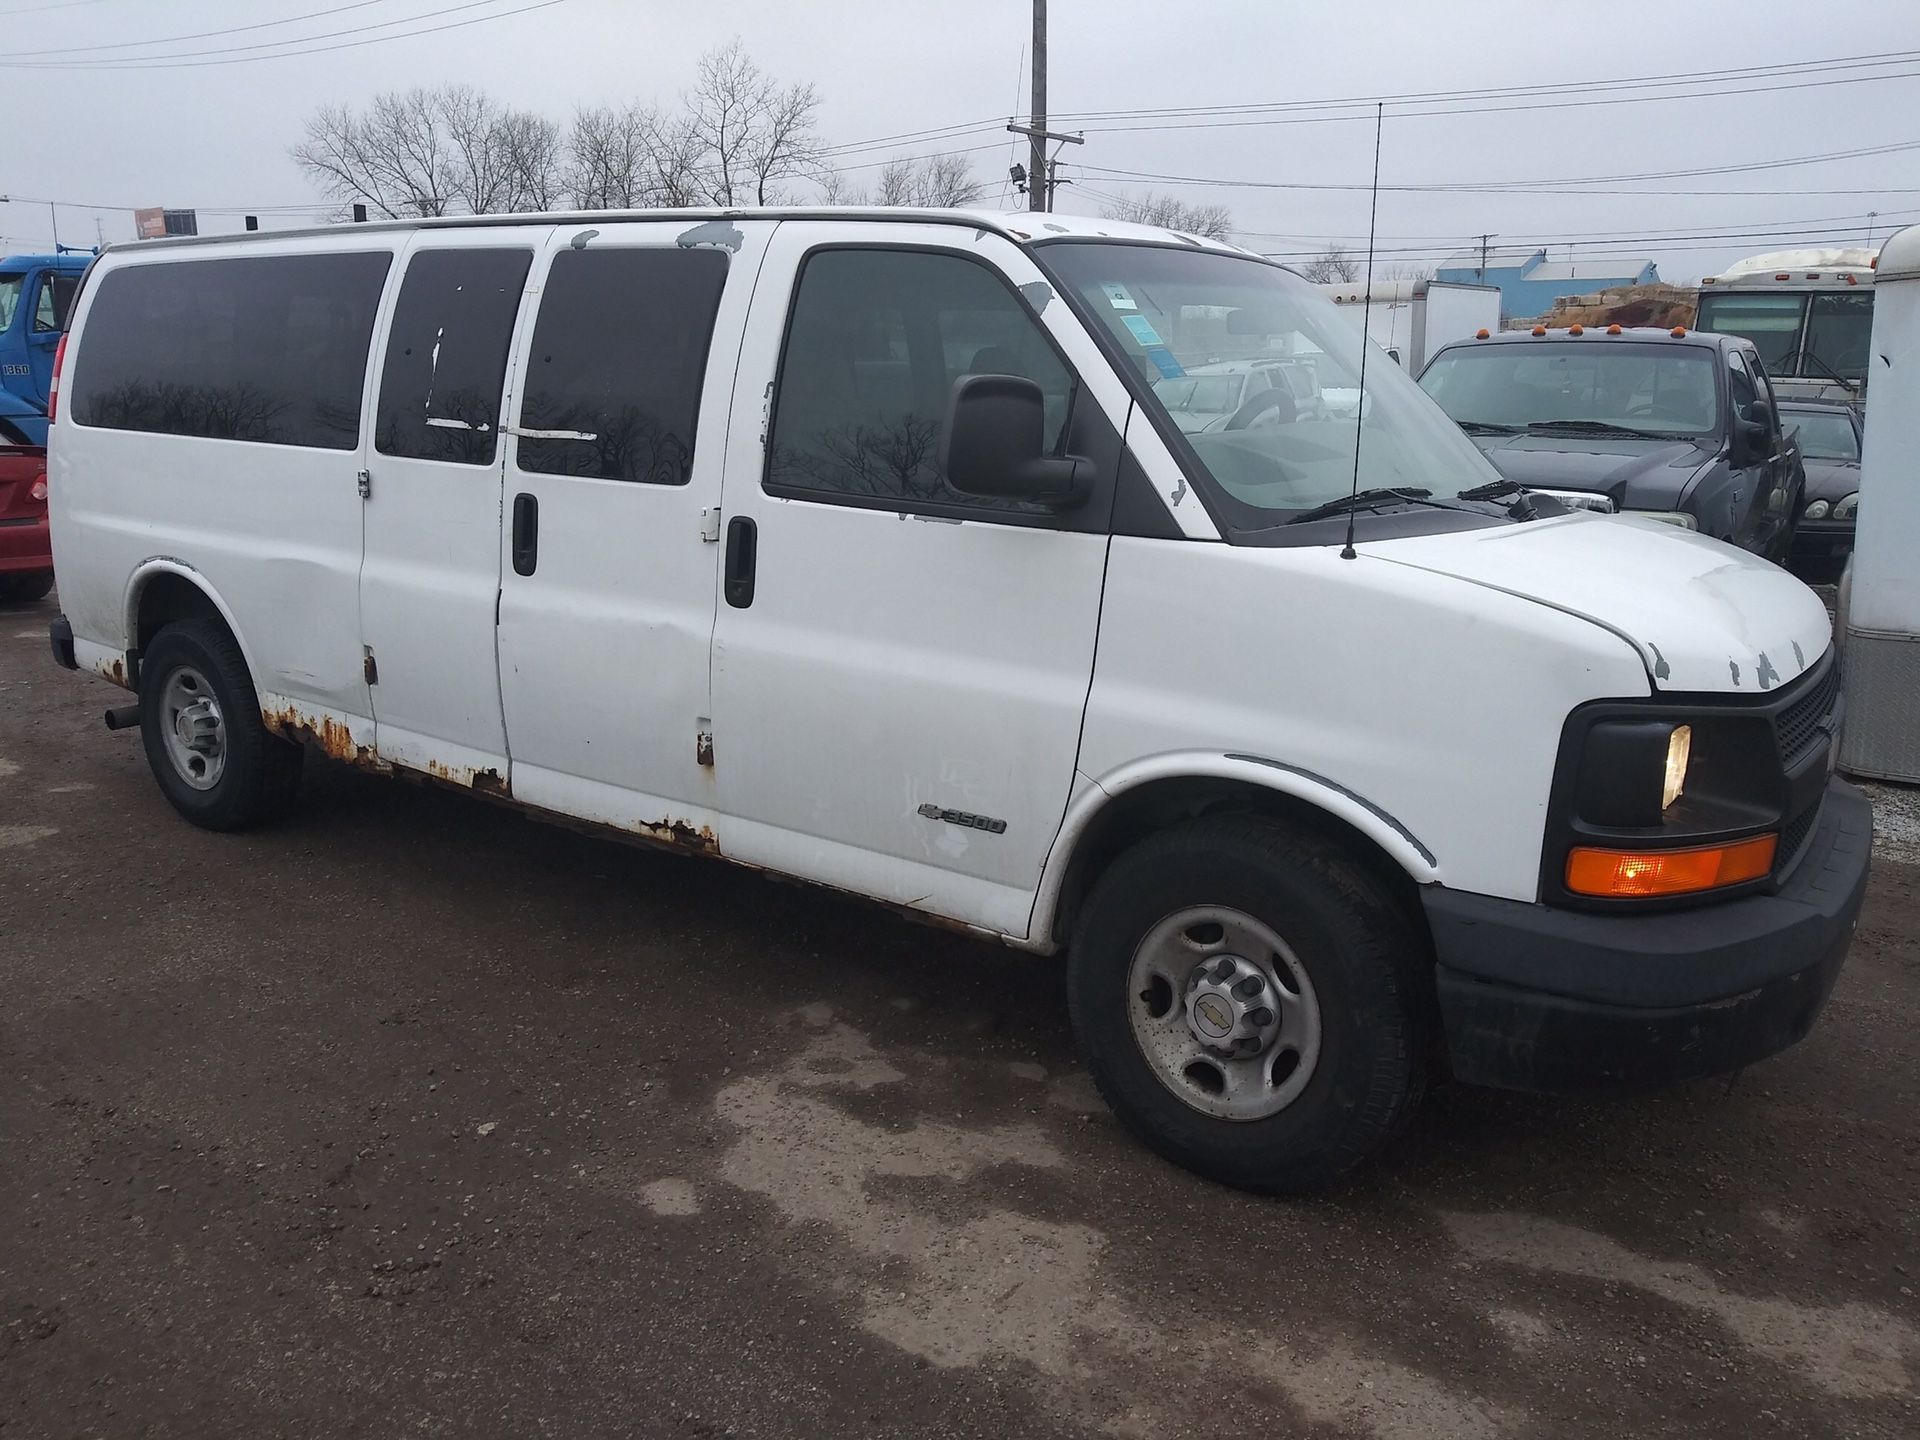 2003 Chevy Express van 3500 (Parts only)